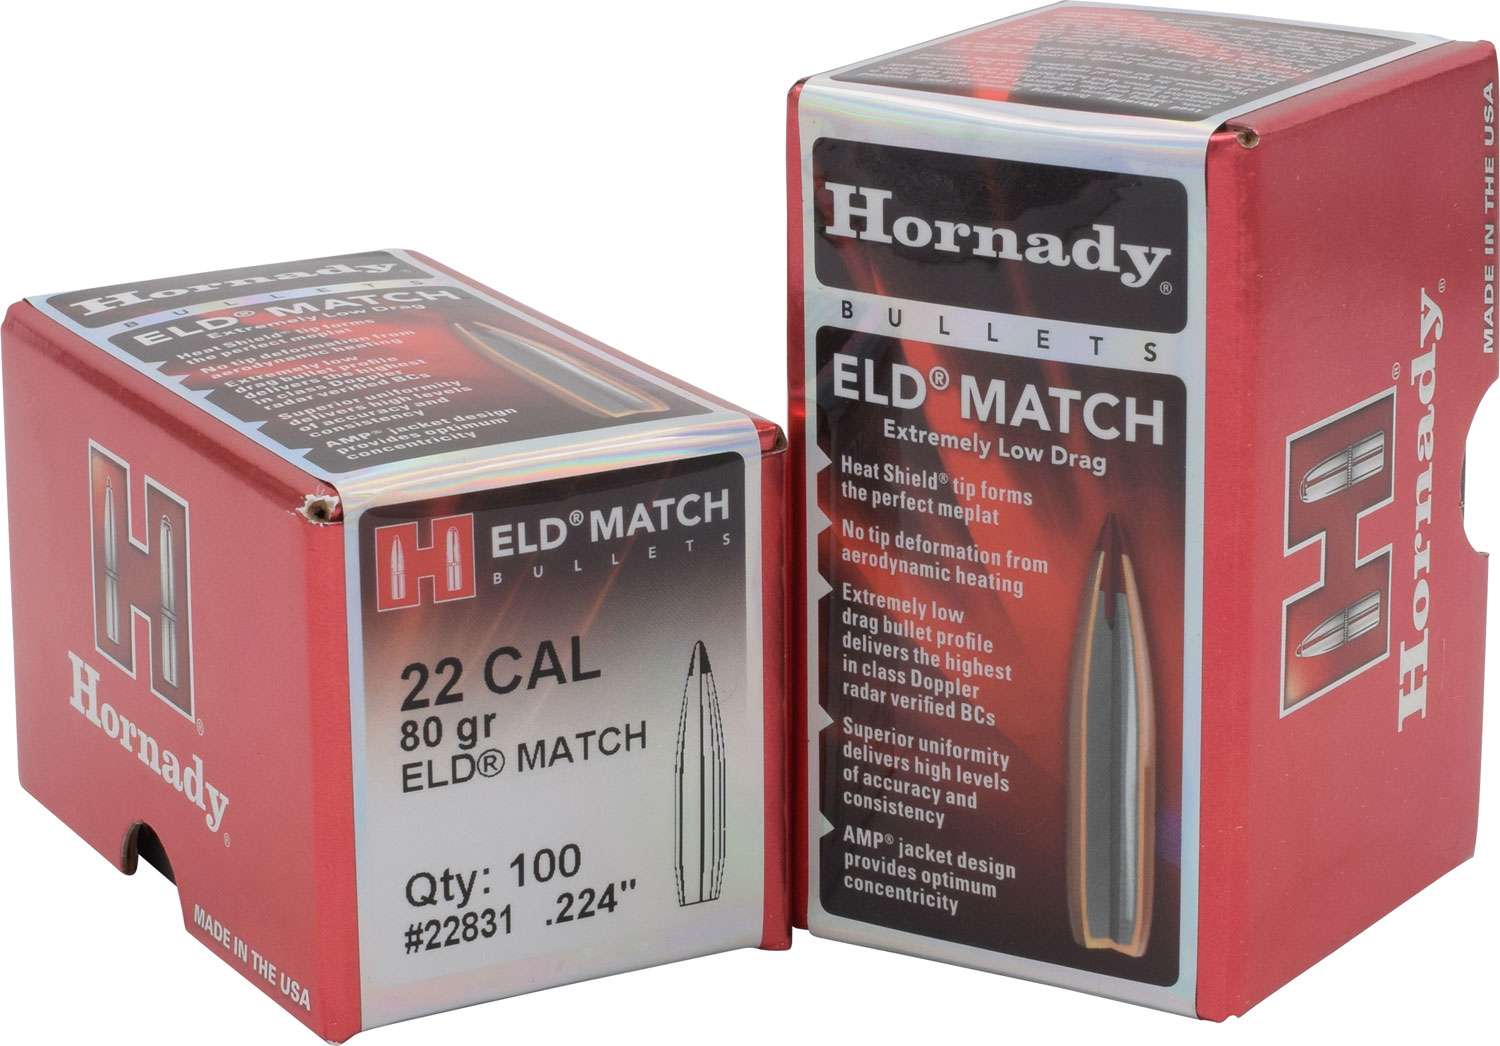 hornady-22831-eld-match-22-cal-224-80-gr-extremely-low-drag-match-100